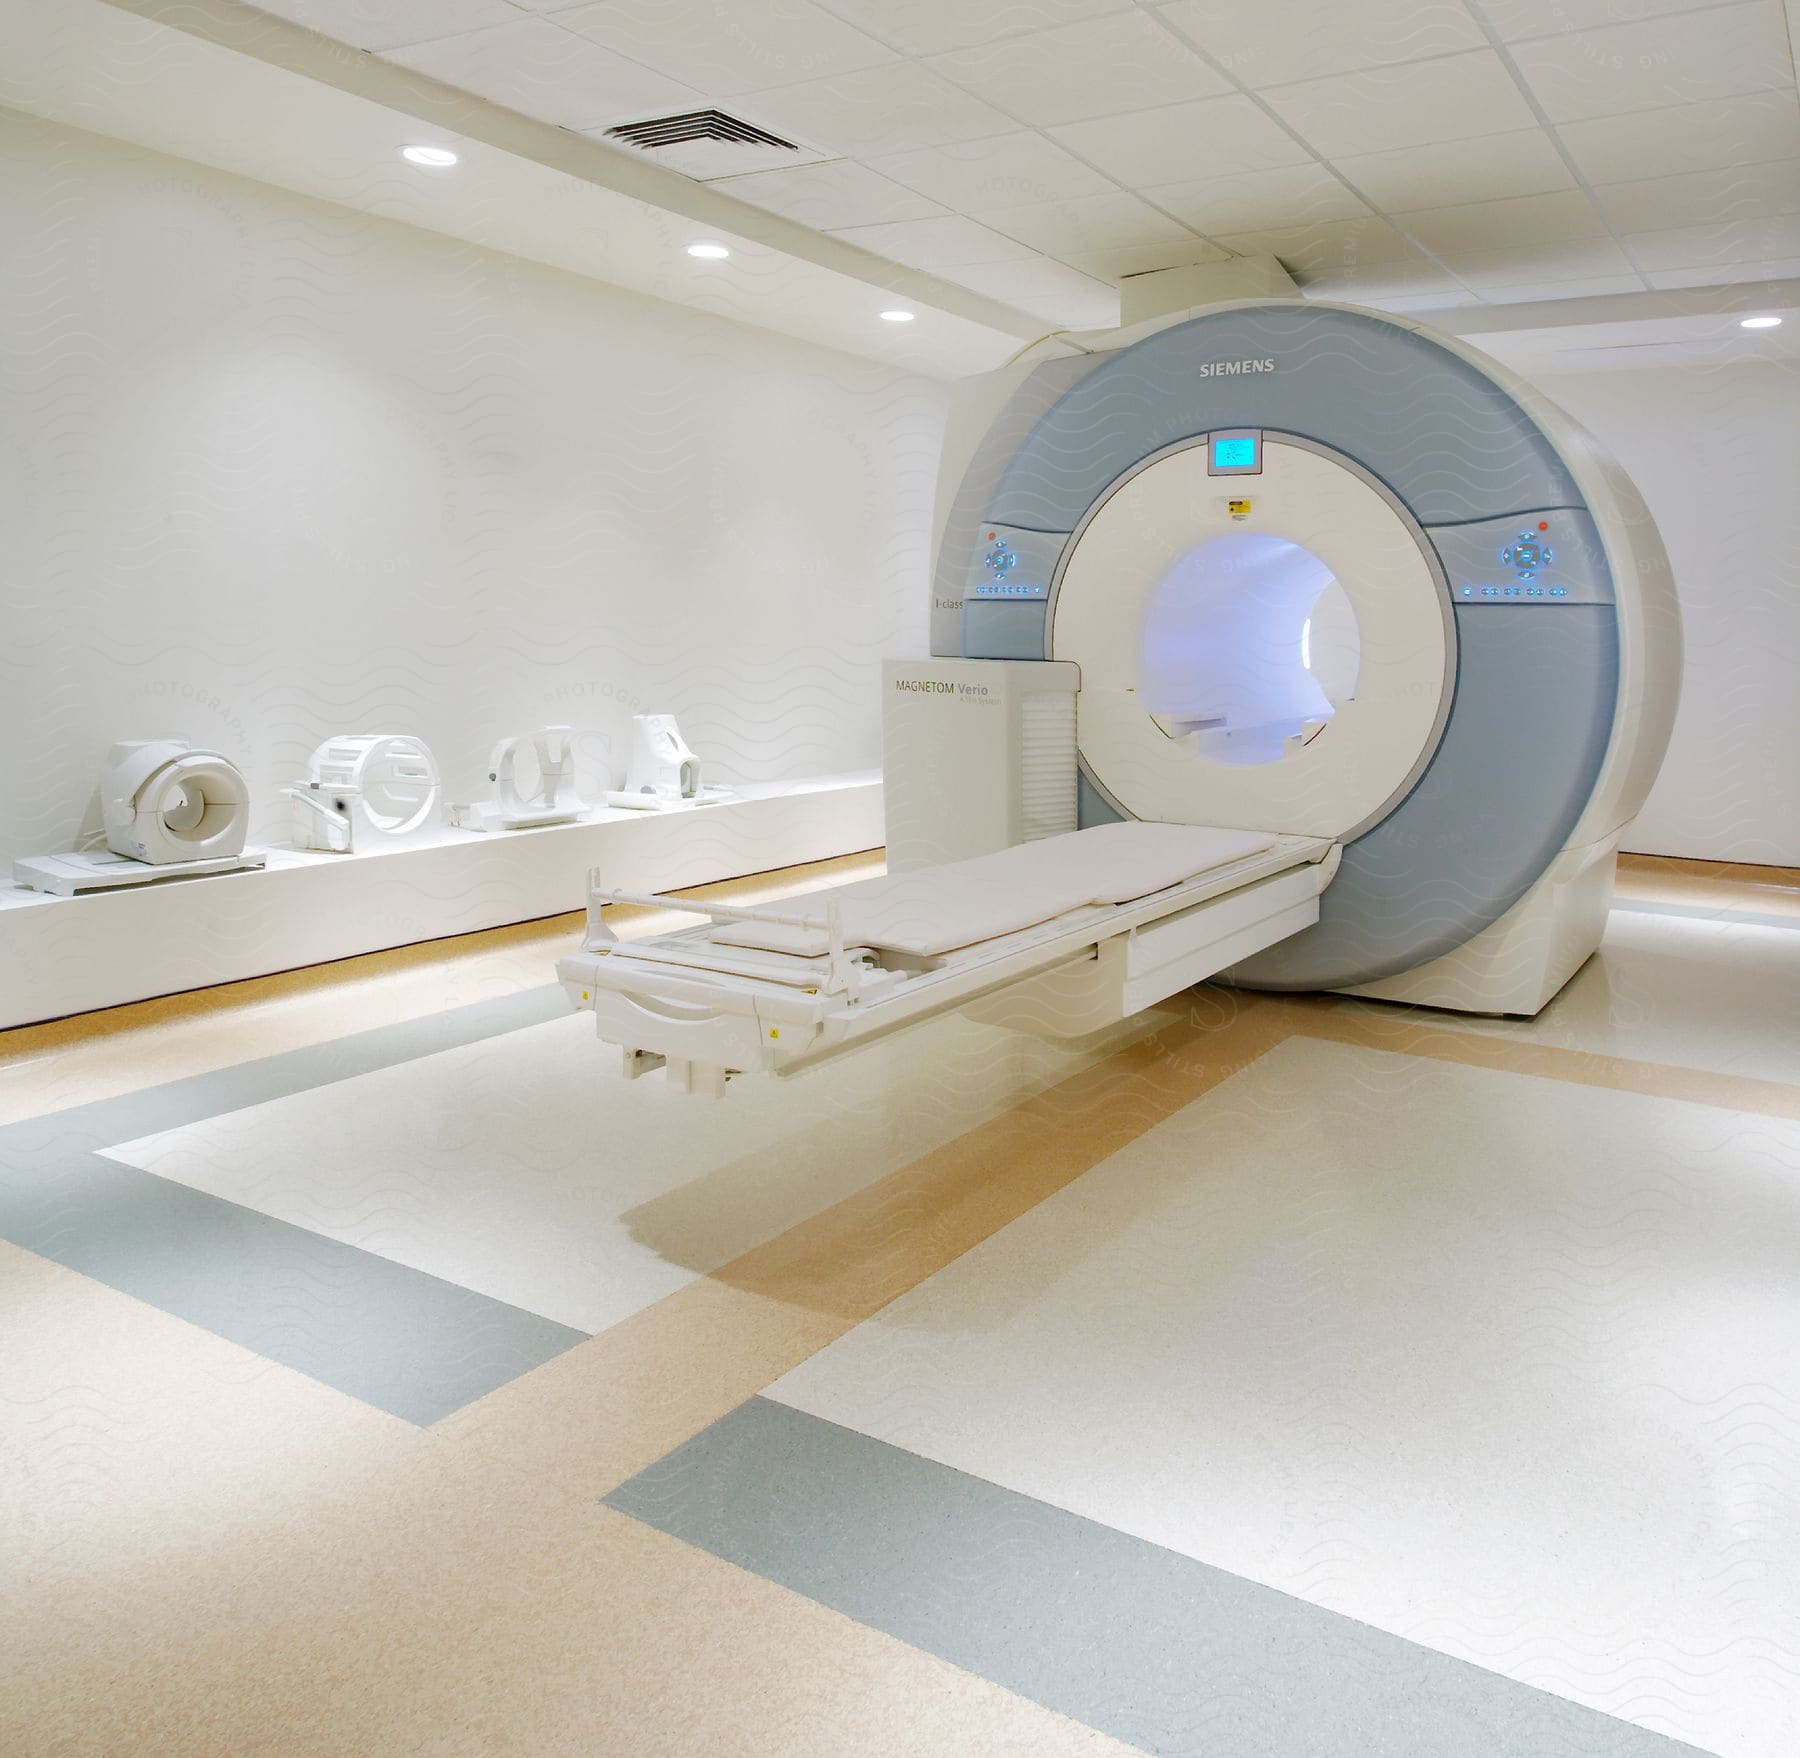 Magnetic resonance imaging equipment in a healthcare structure